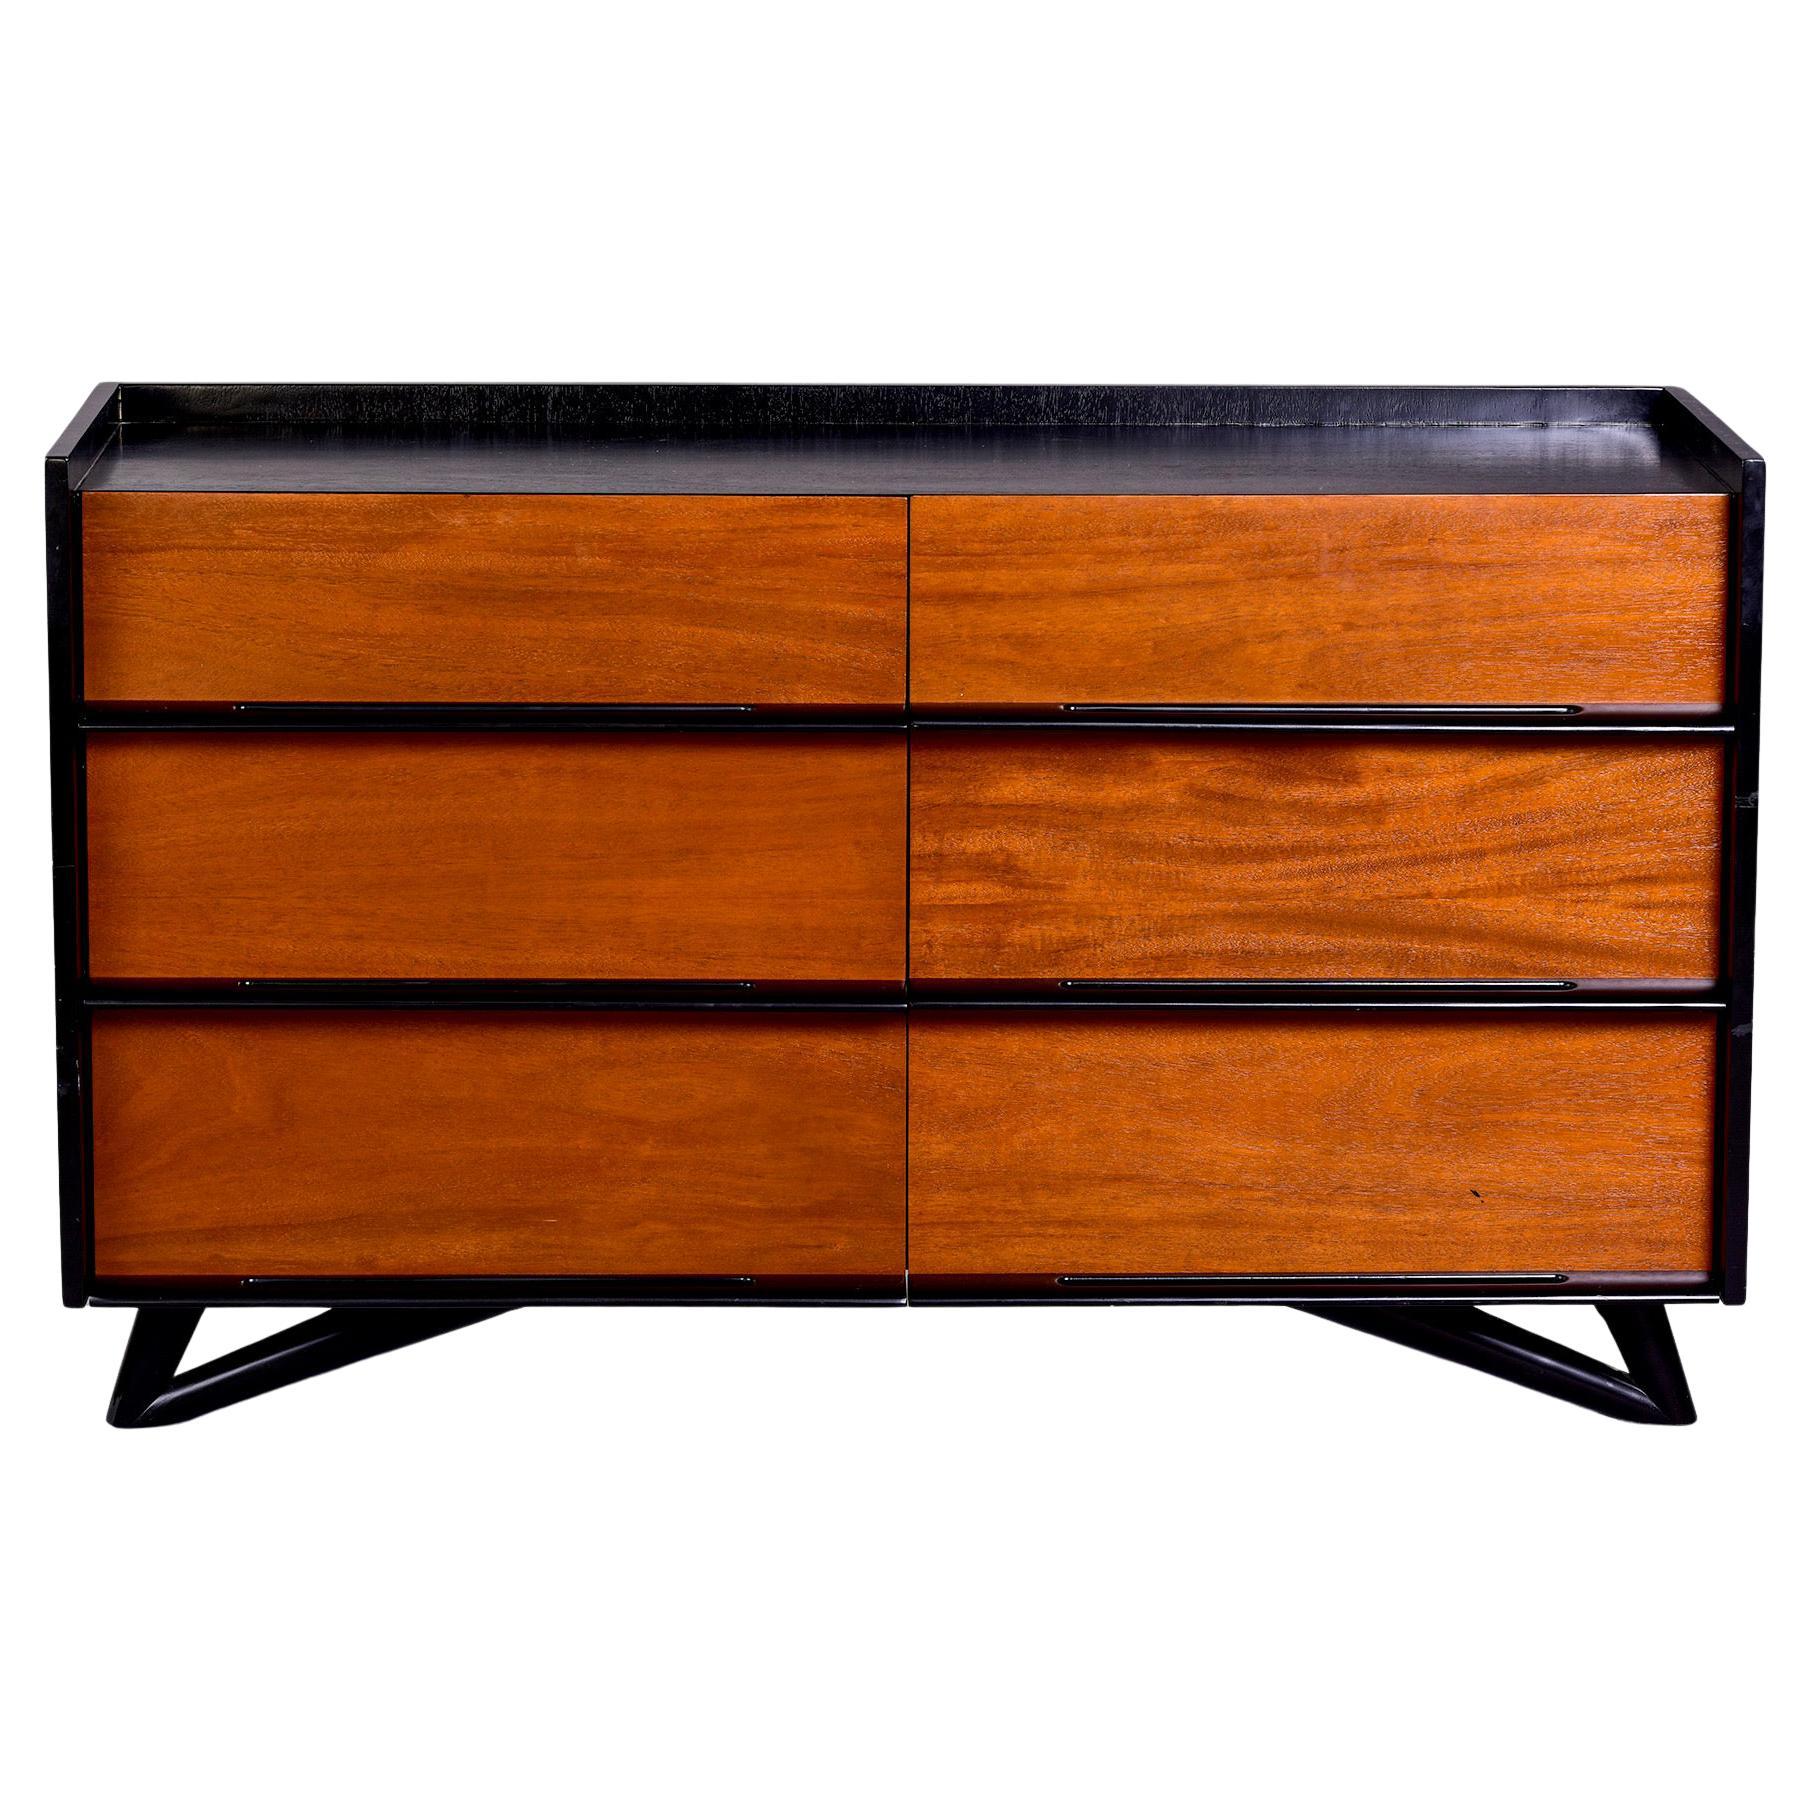 Art Deco Style Chest Of Drawers In Natural Goatskin And Black Lacquered Wood For Sale At 1stdibs